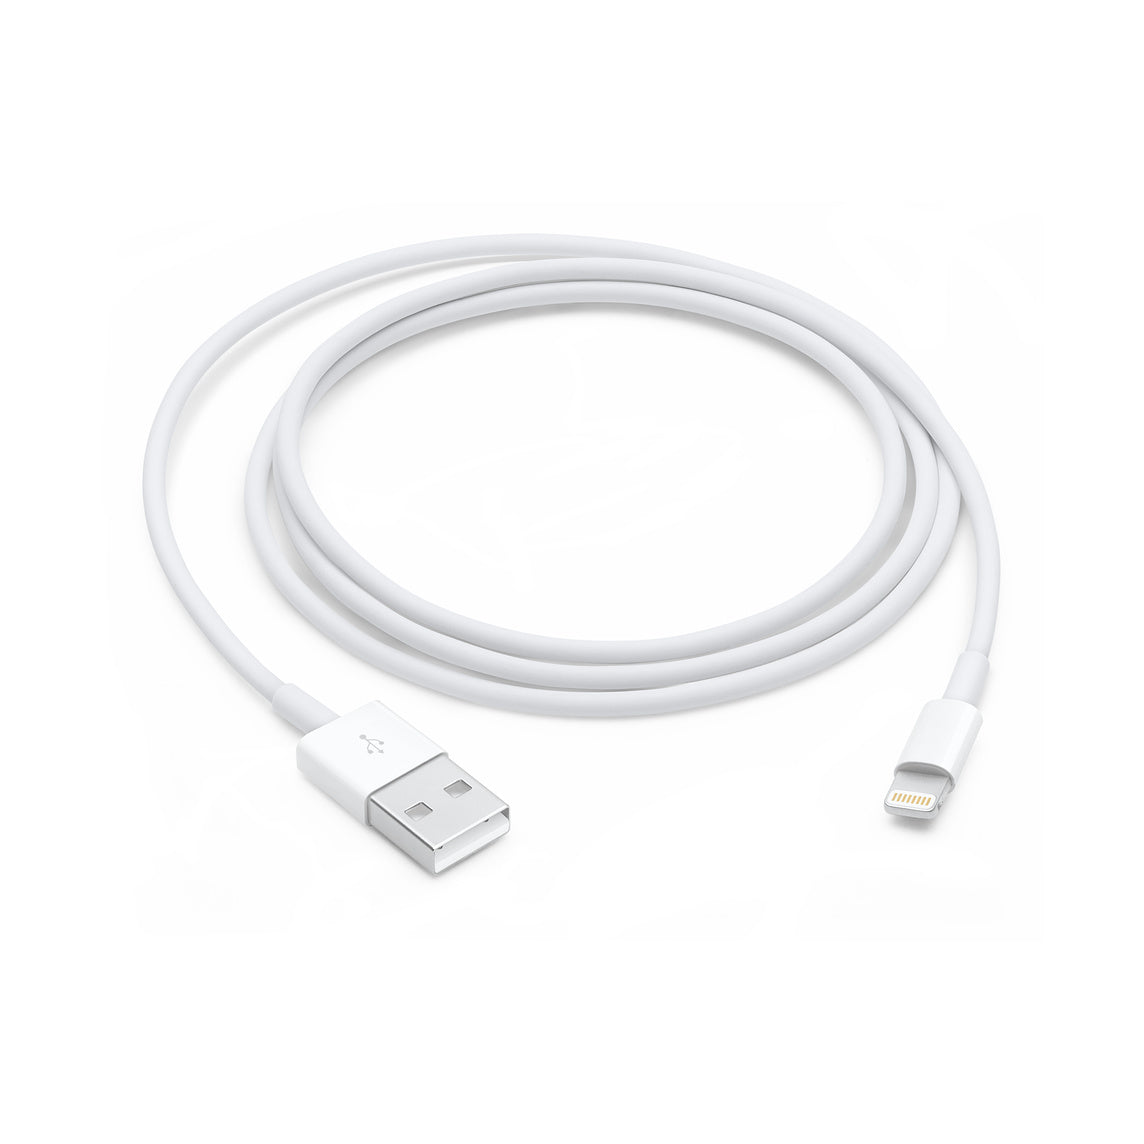 Apple Original iPhone Lightning Cable (1M) + Charging Adapter (5W) - Combo Pack 1